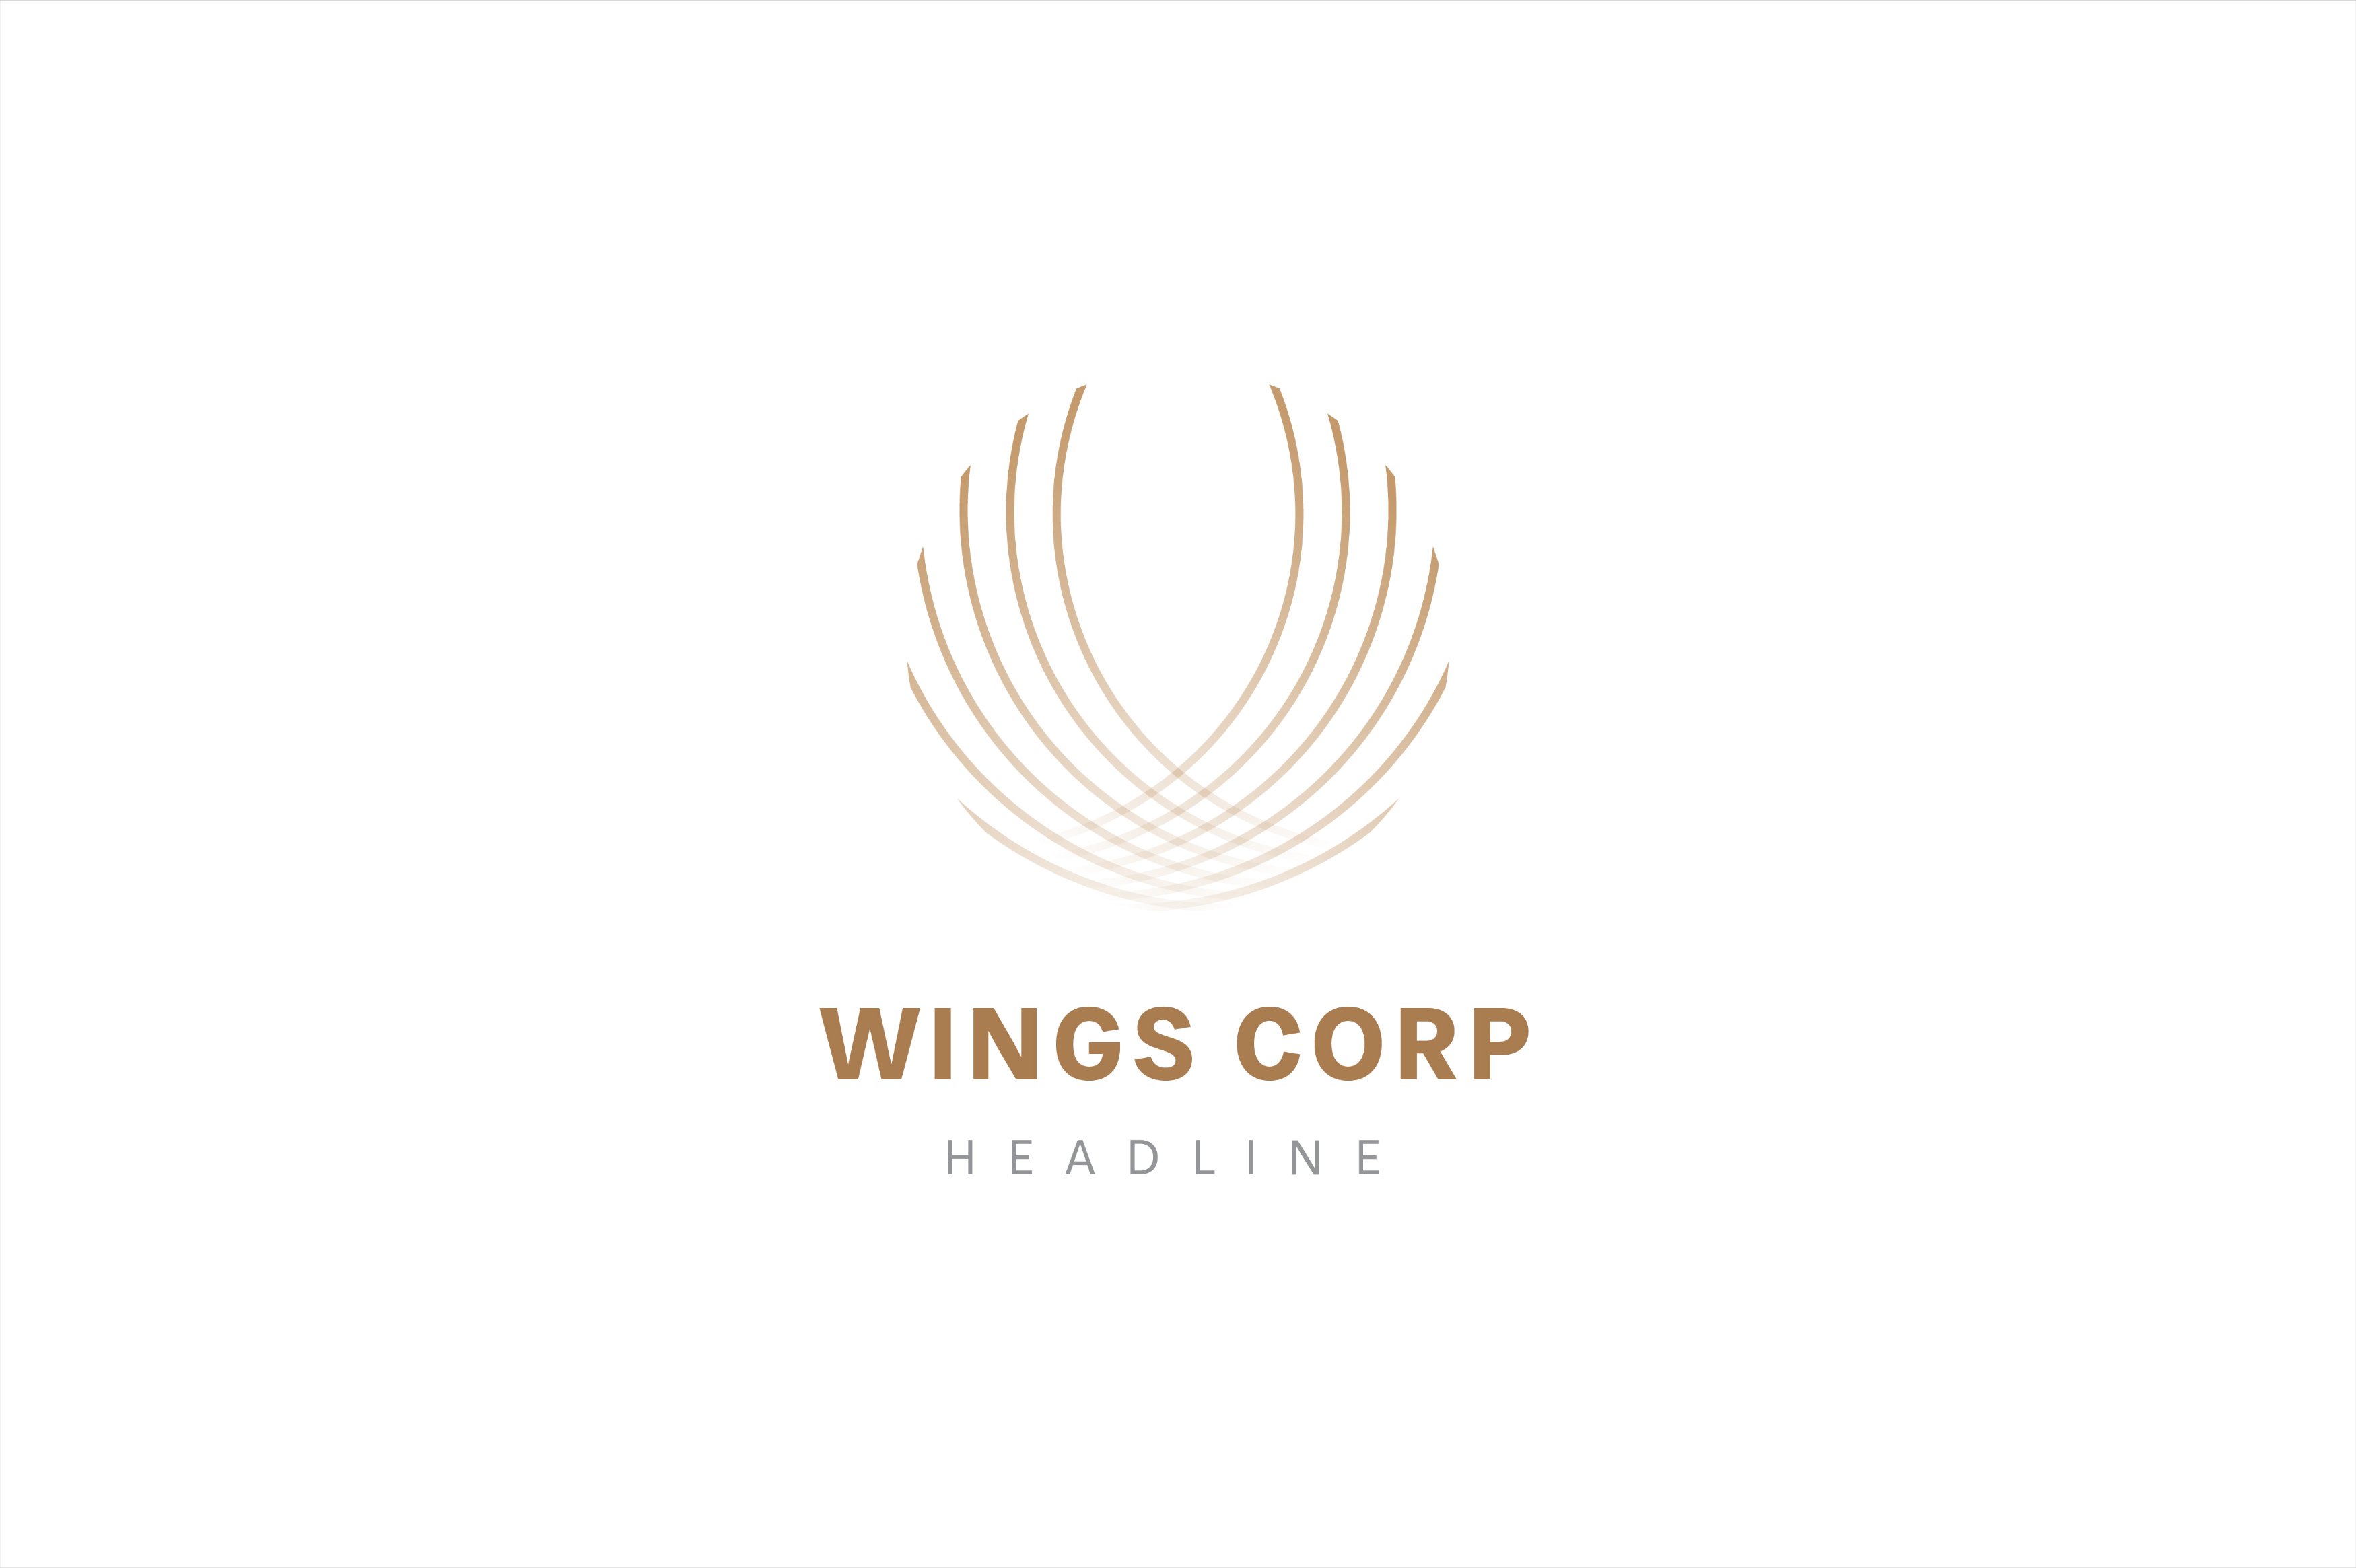 Wings corp logo template. cover image.